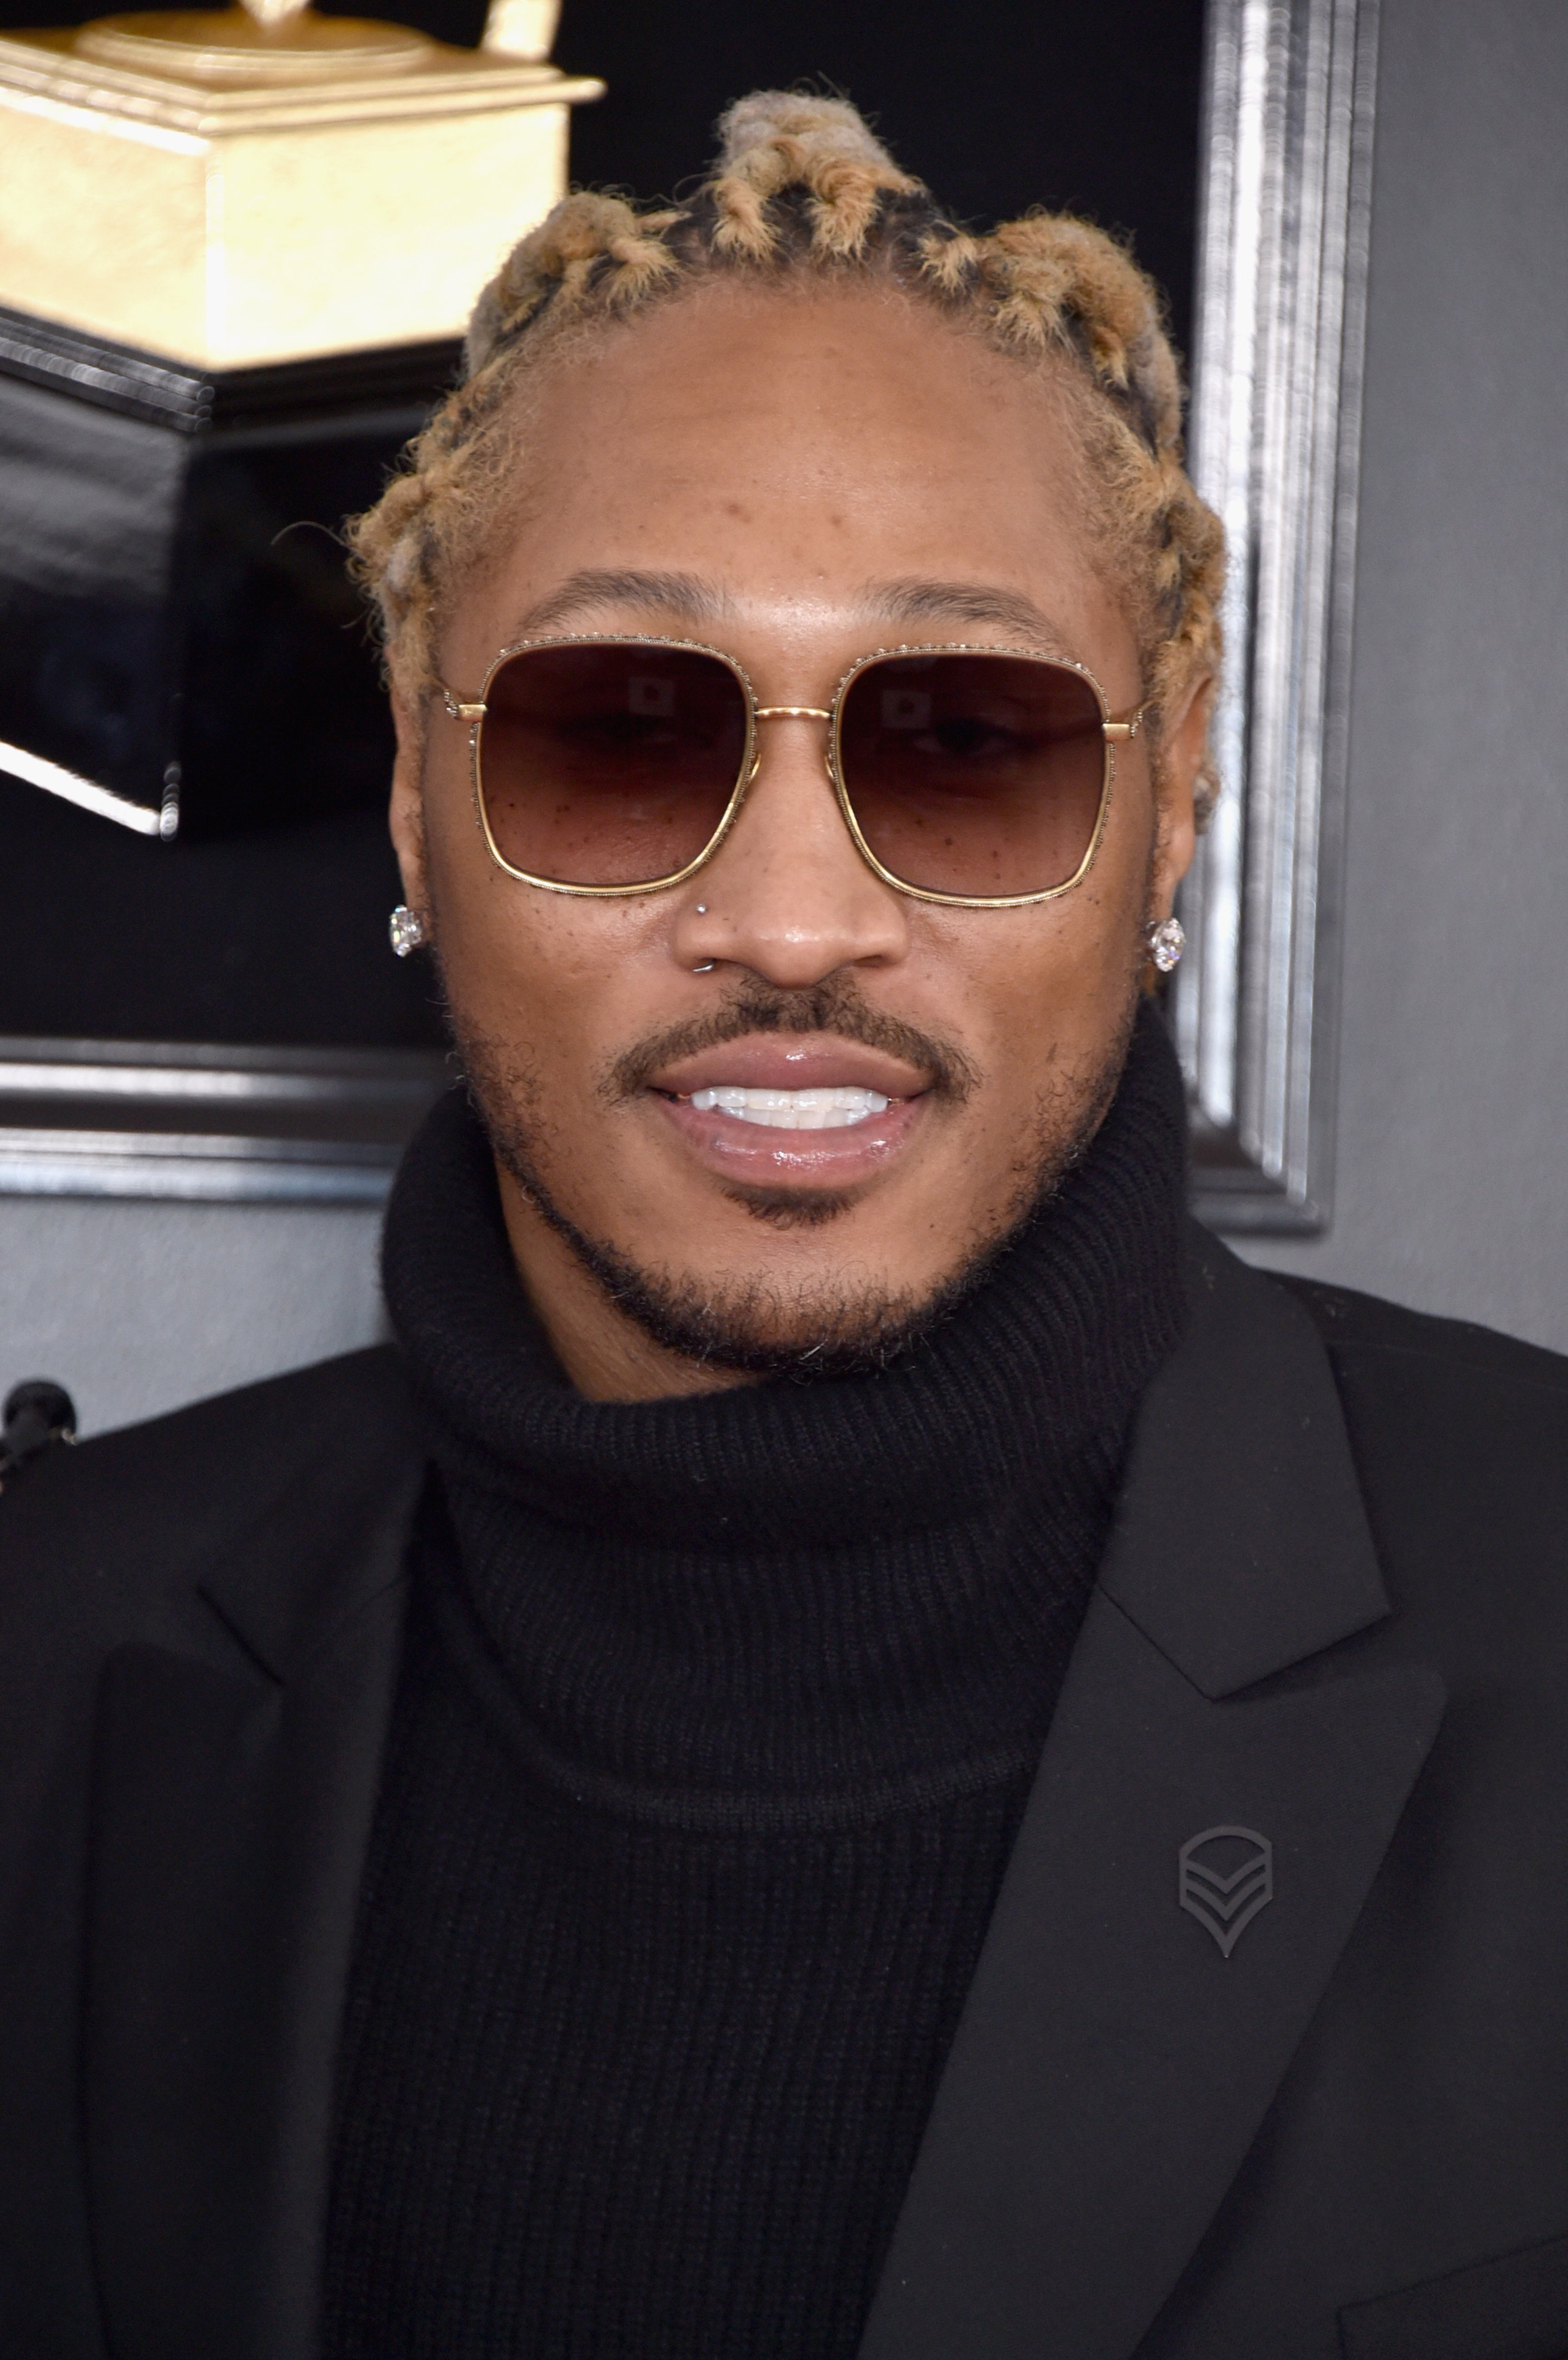 Future at the 61st Annual GRAMMY Awards on Feb. 10, 2019 in California | Photo: Getty Images